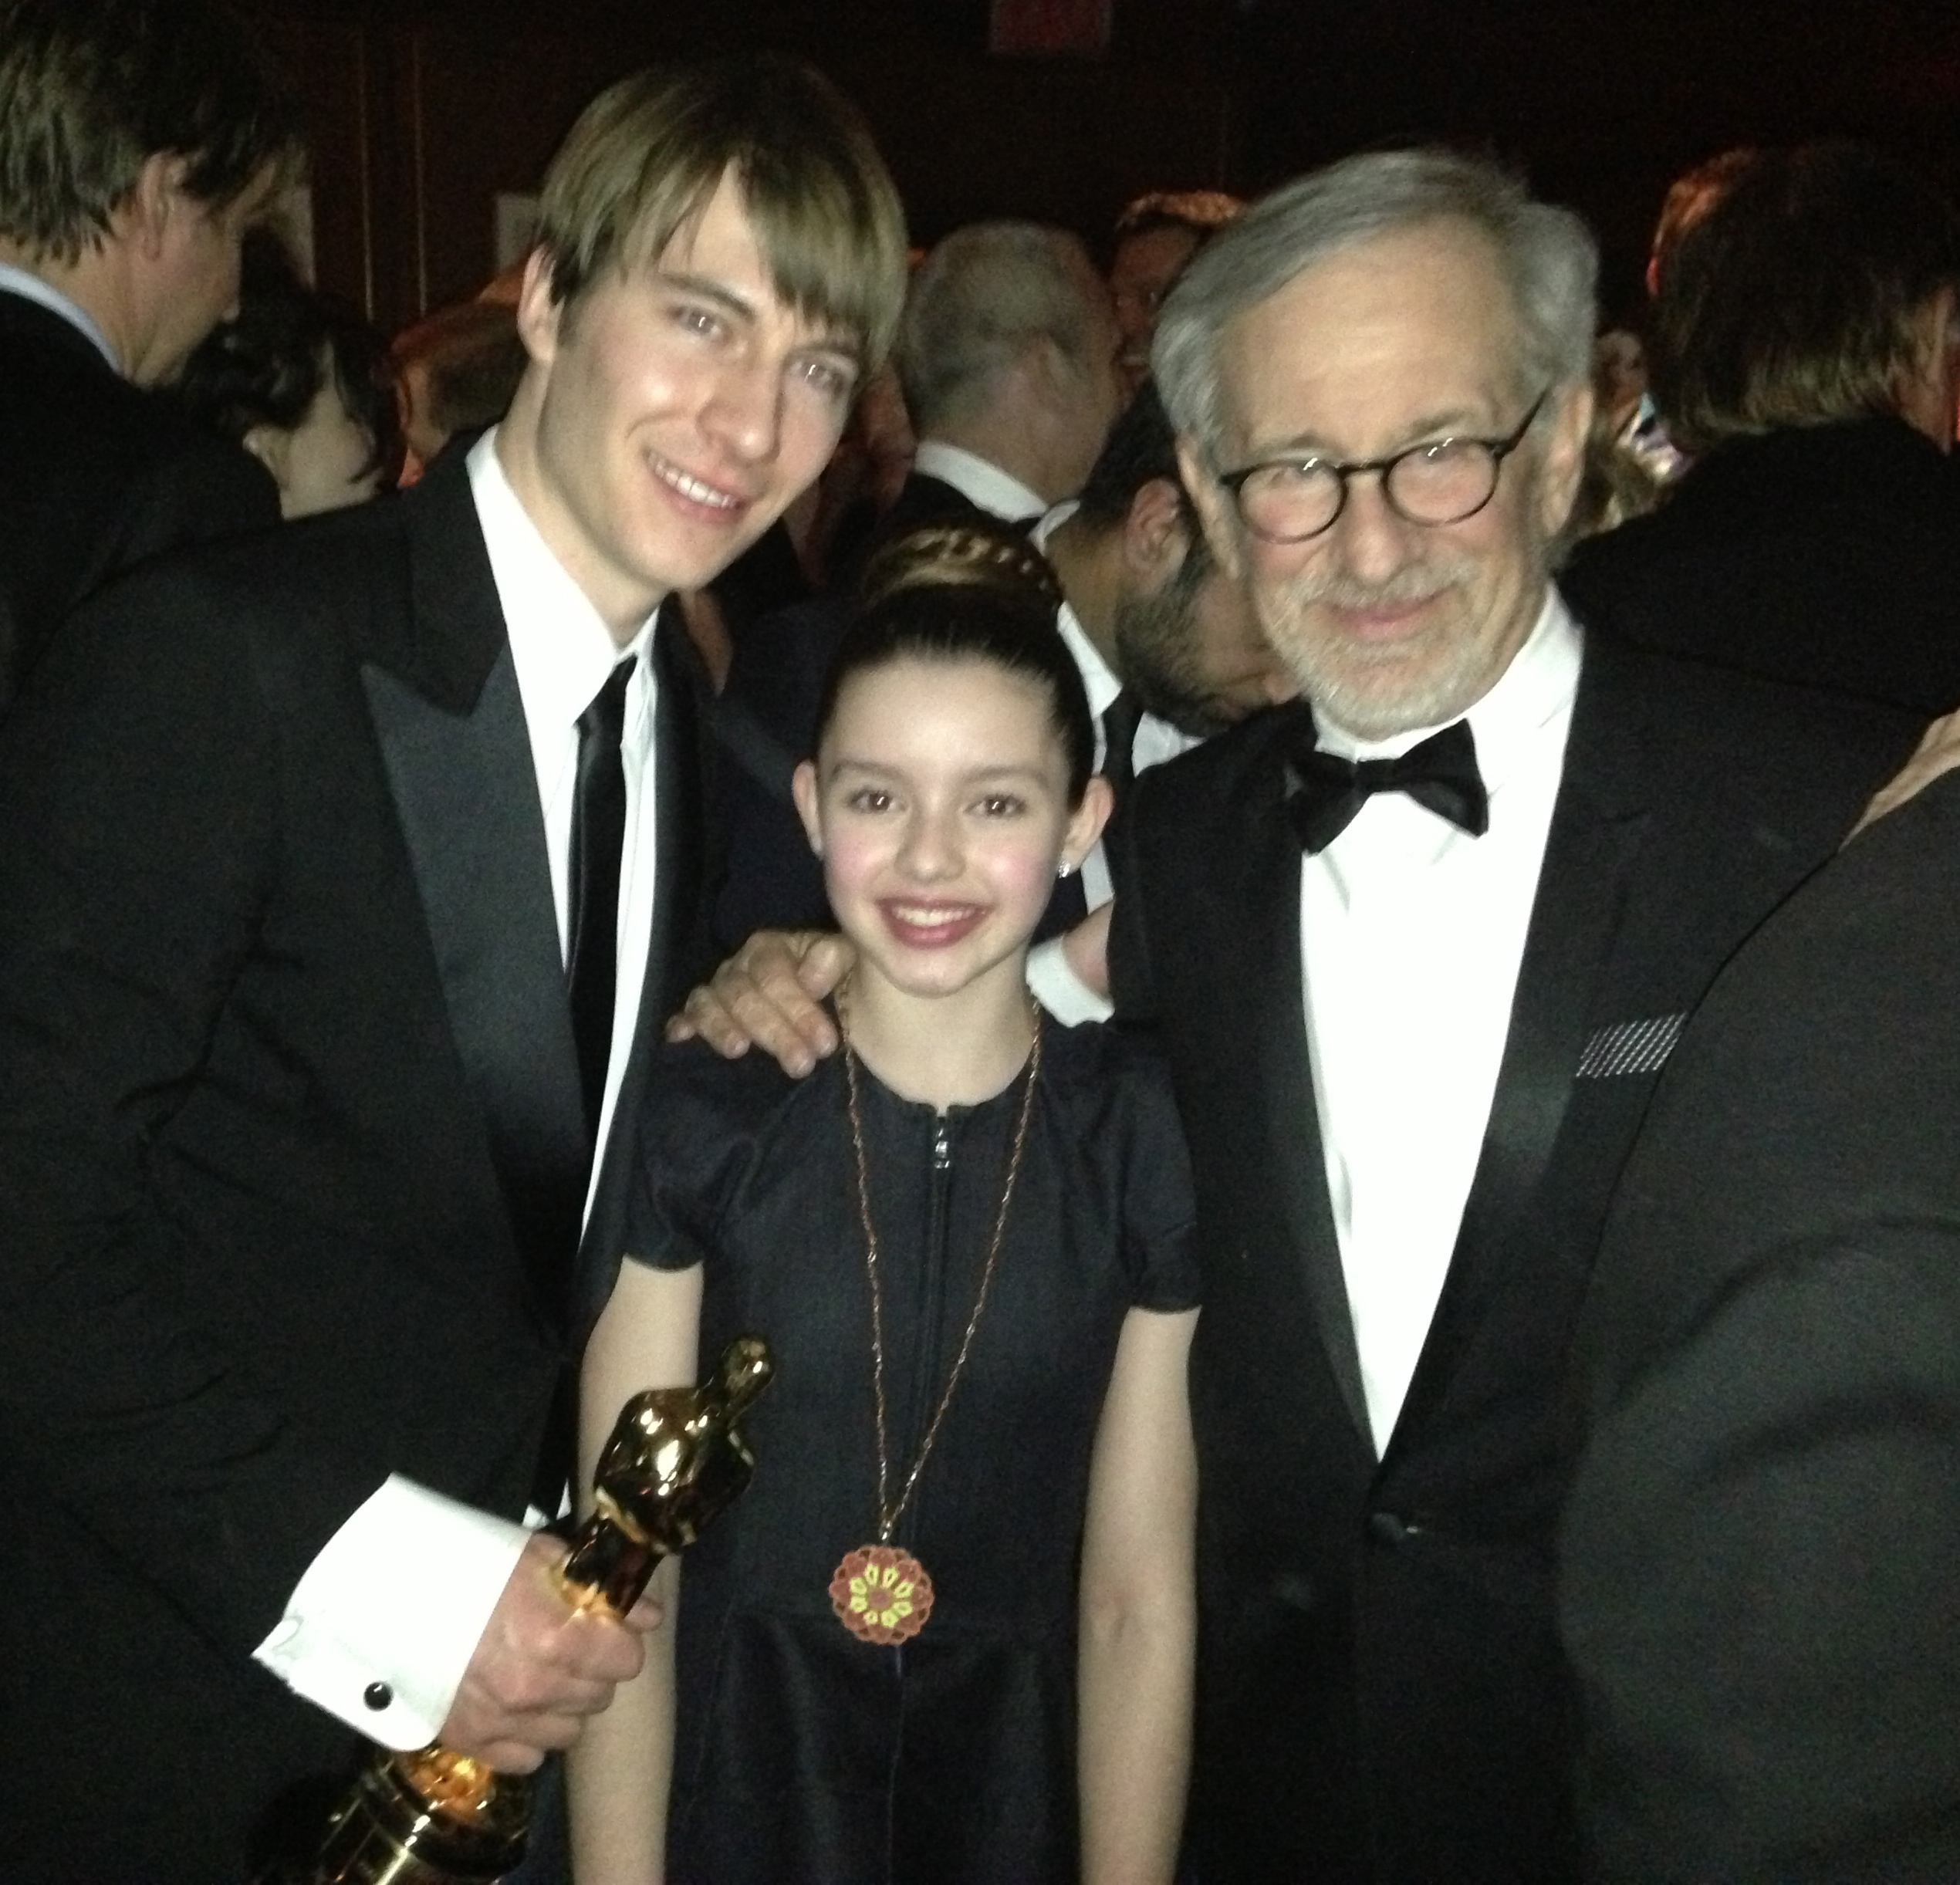 Andrew Napier, Fatima Ptacek, and Steven Spielberg at the 2013 Vanity Fair Oscar Party.